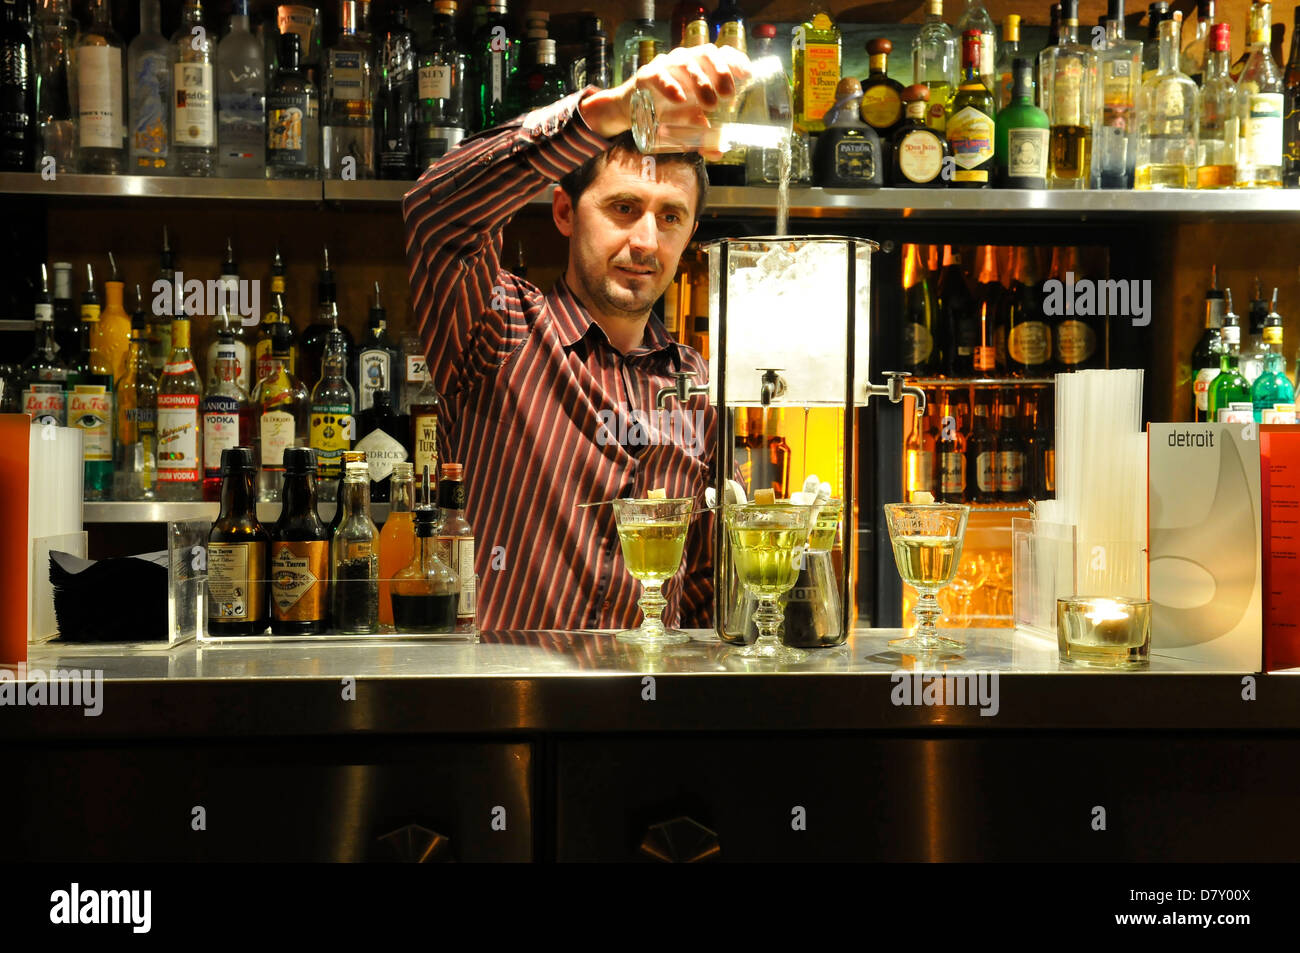 Barman fixing an absinthe drink at Detroit Bar in Covent Garden, London Stock Photo